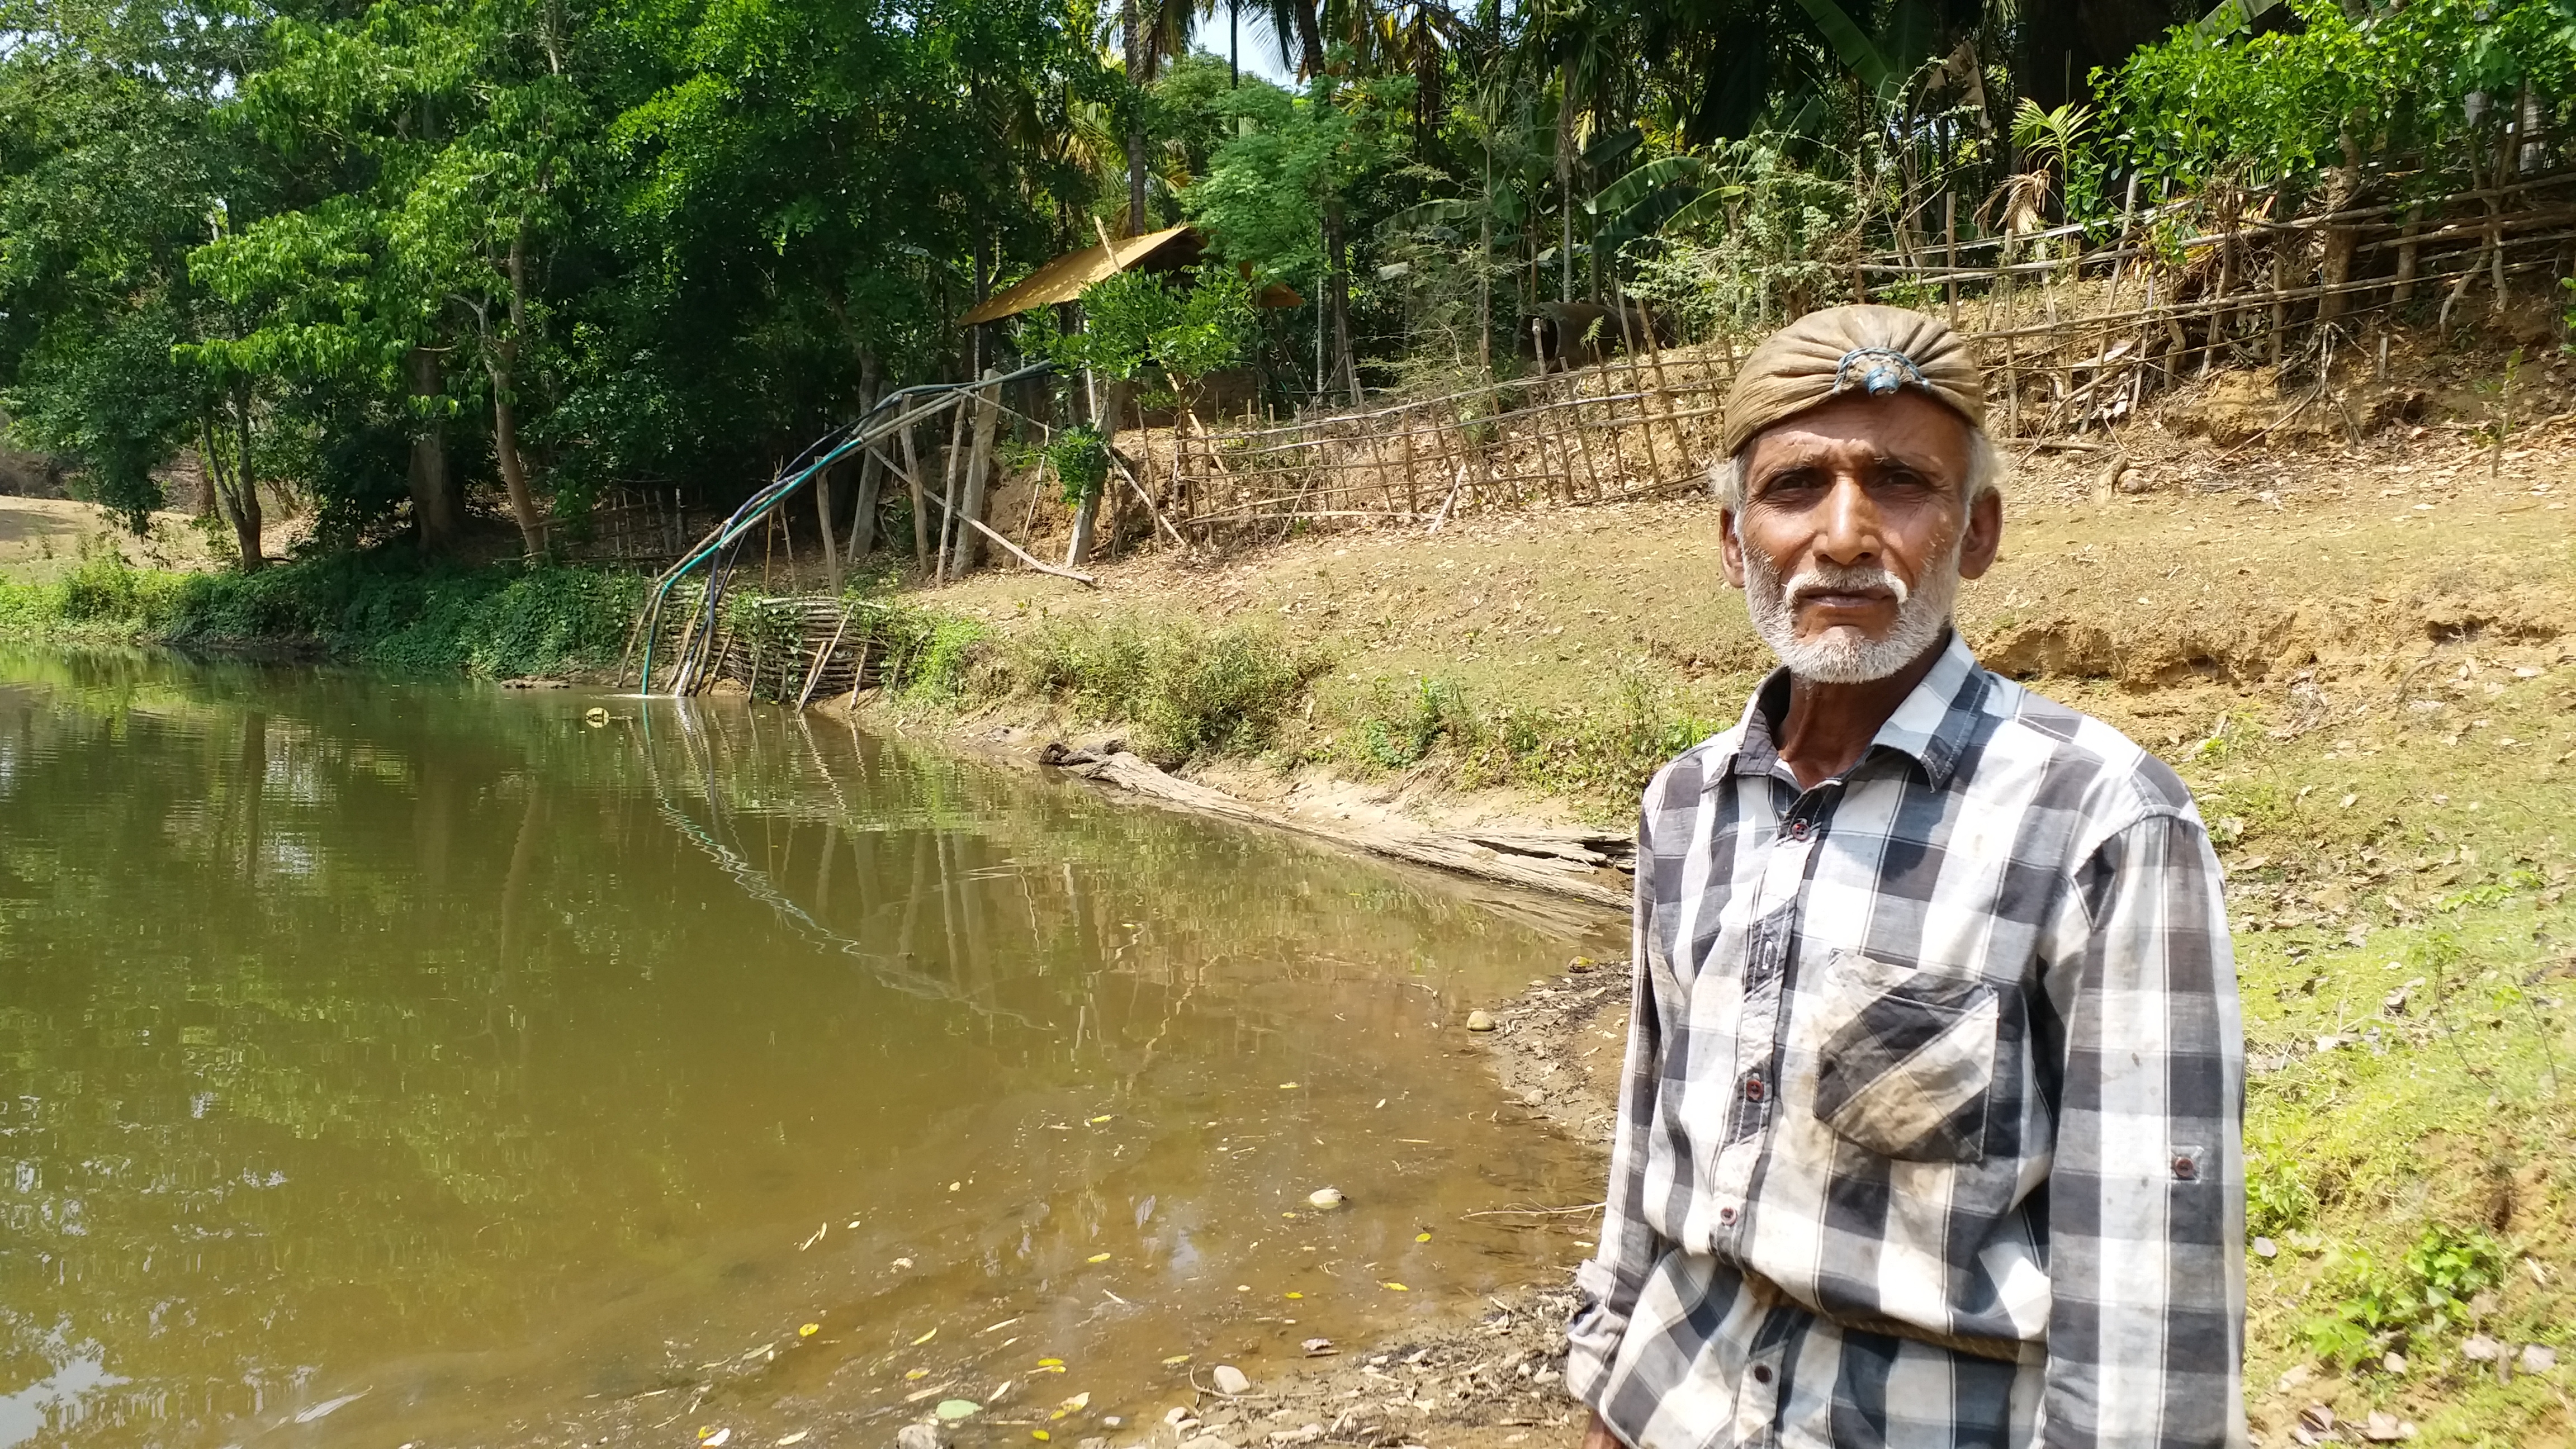 PAPANNA BHATTA DRAINS BOREWELL WATER TO RIVER TO QUENCH THIRST OF WILD ANIMALS